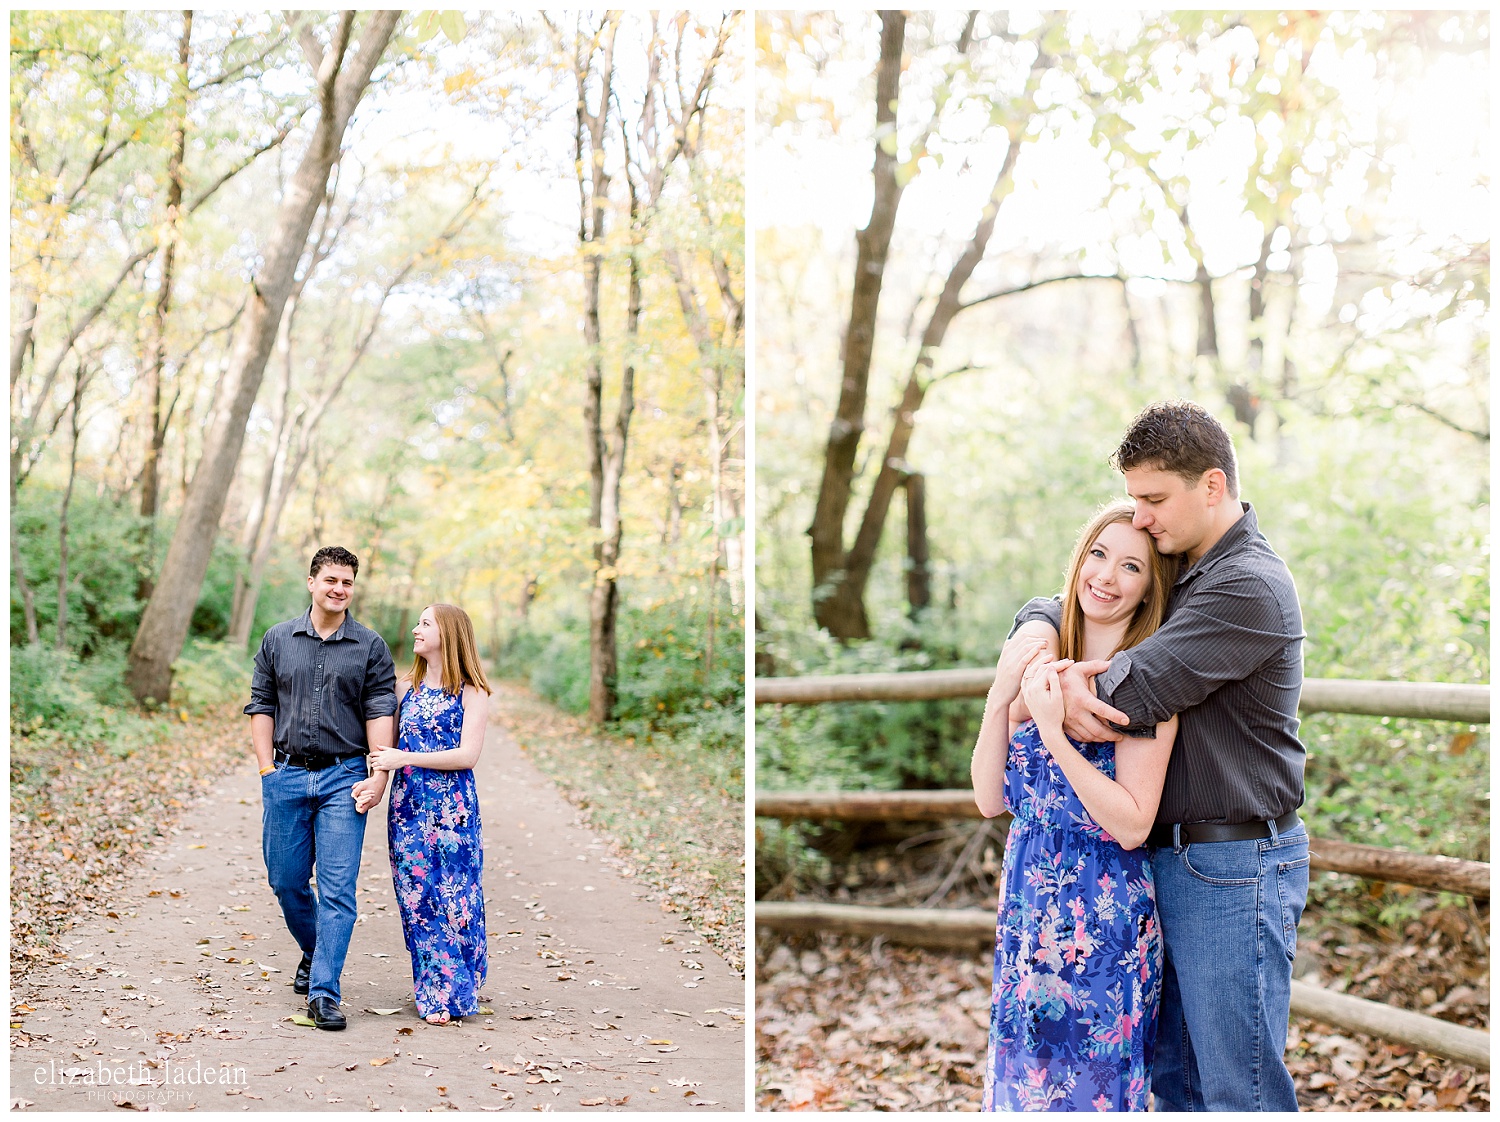 Northland-KC-Fall-Engagement-Photos-with-dog-A+B-2018-elizabeth-ladean-photography-photo_1481.jpg